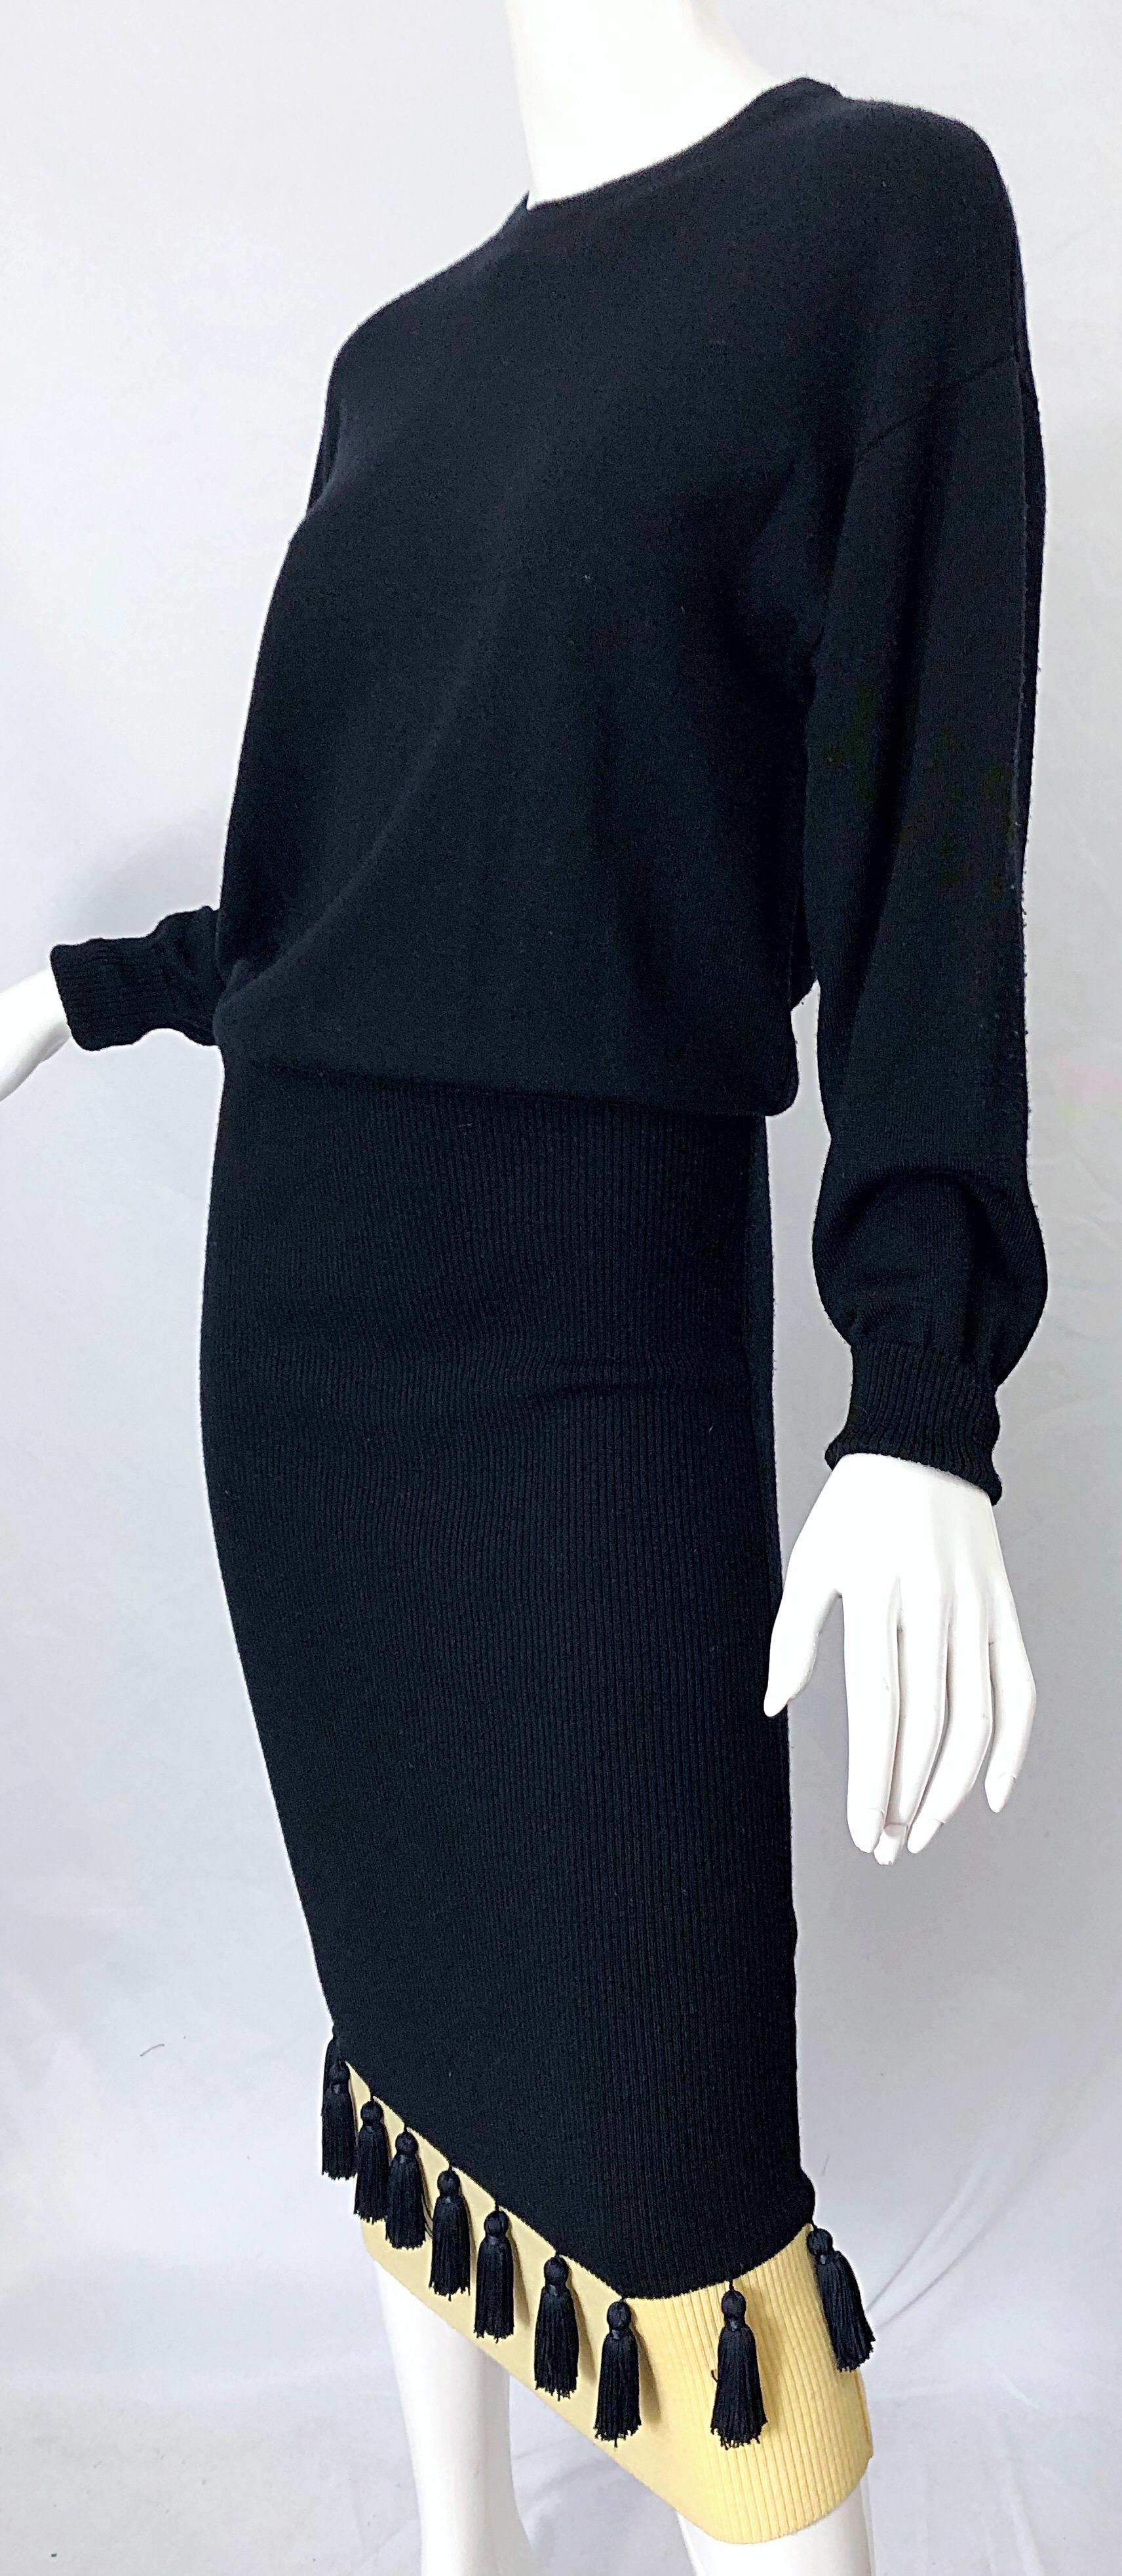 1980s Angelo Tarlazzi Black and Ivory Wool Dolman Sleeve 80s Sweater Dress For Sale 3